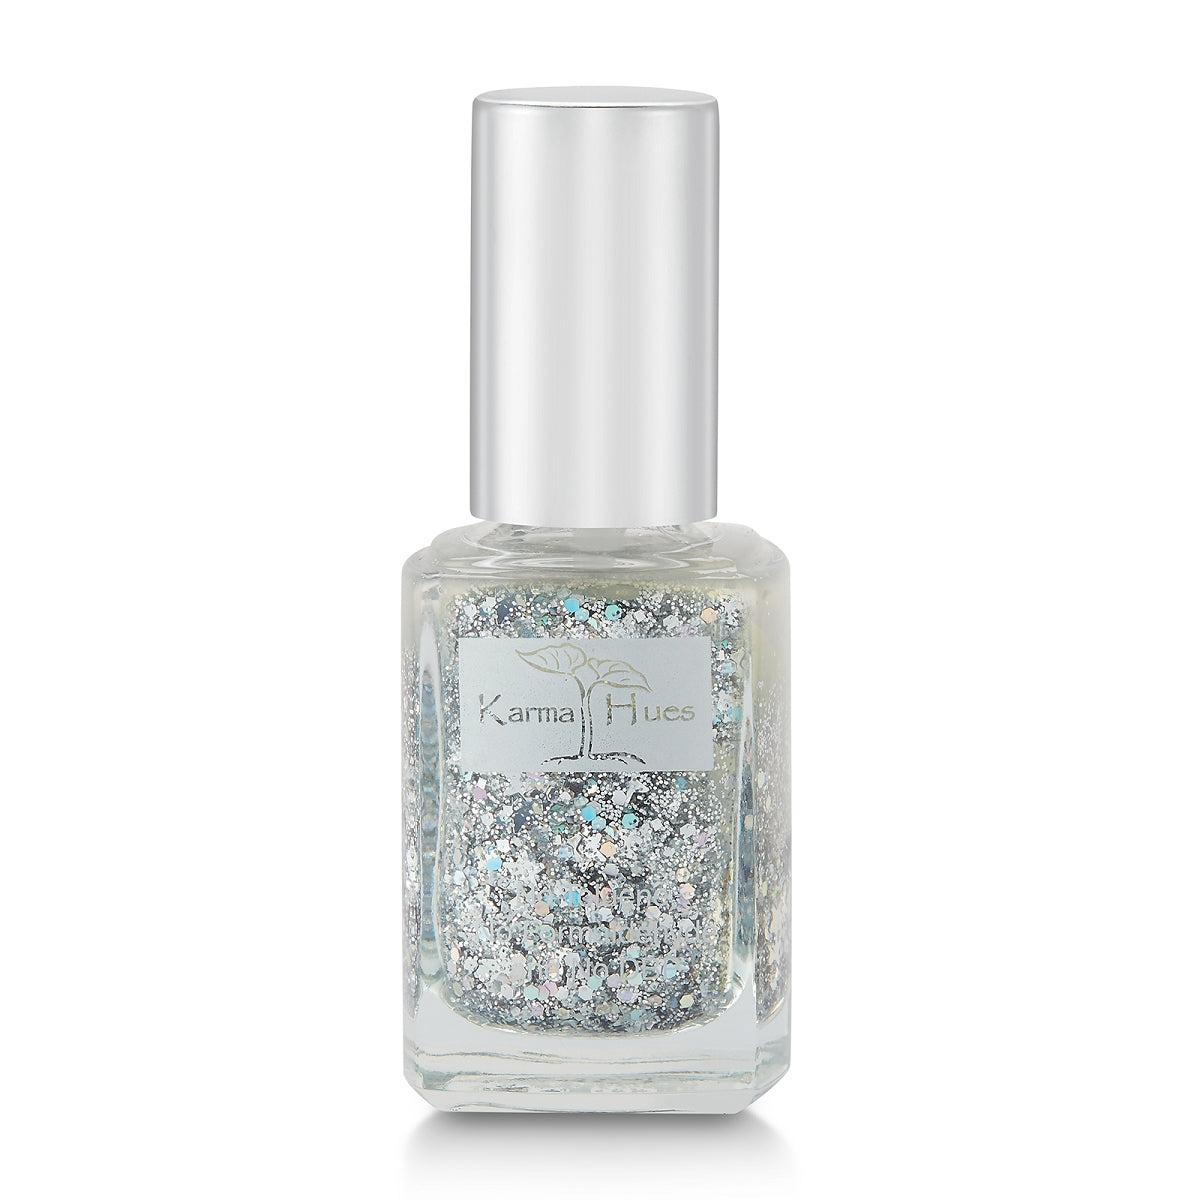 Karma Organic Nail Polish - Quick Dry Nail Lacquer, Non-Toxic, Vegan, and Cruelty-Free Nail Paint Art for Adults & Kids - No Toluene, No Formaldehyde, No DBP, and Free of TPHP (Glitter Bomb, 0.43 fl oz.)